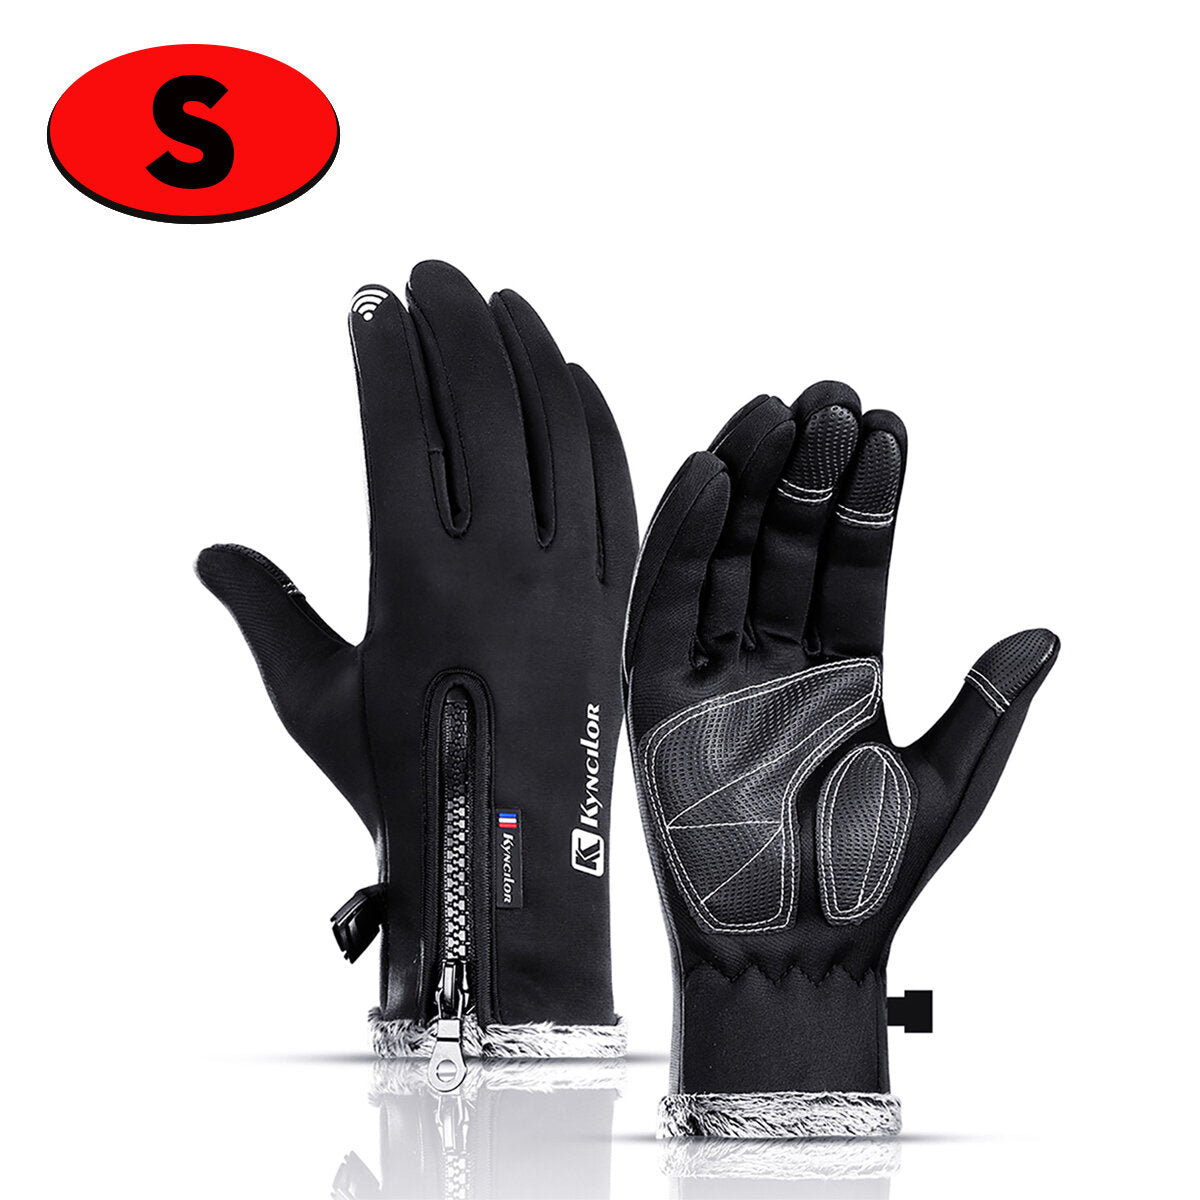 Winter Warm Outdoor Sports Gloves Fleece Windproof Non-slip Touch Screen Ski Riding Motorcycle Gloves Skiing Gloves